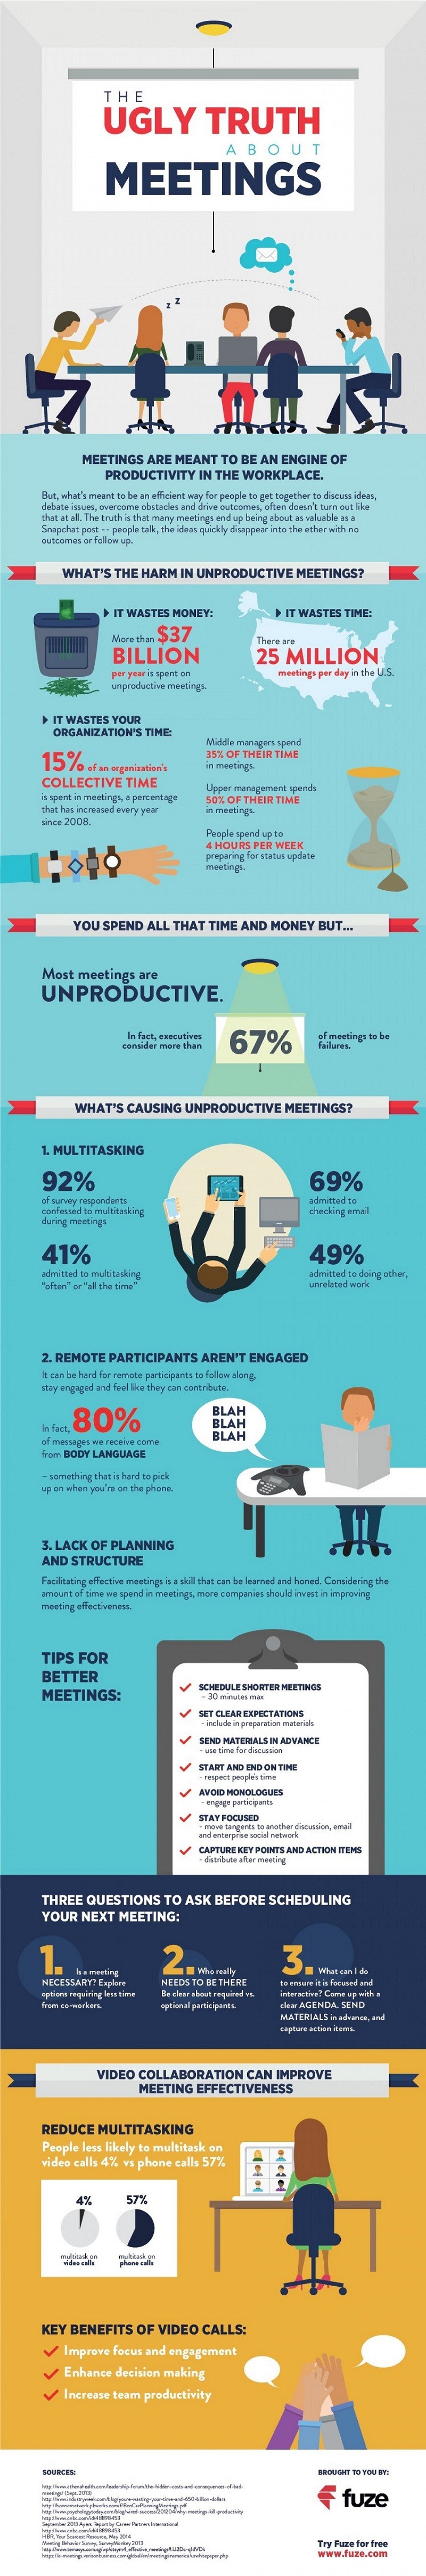 150629-tips-for-productive-meetings-infographic